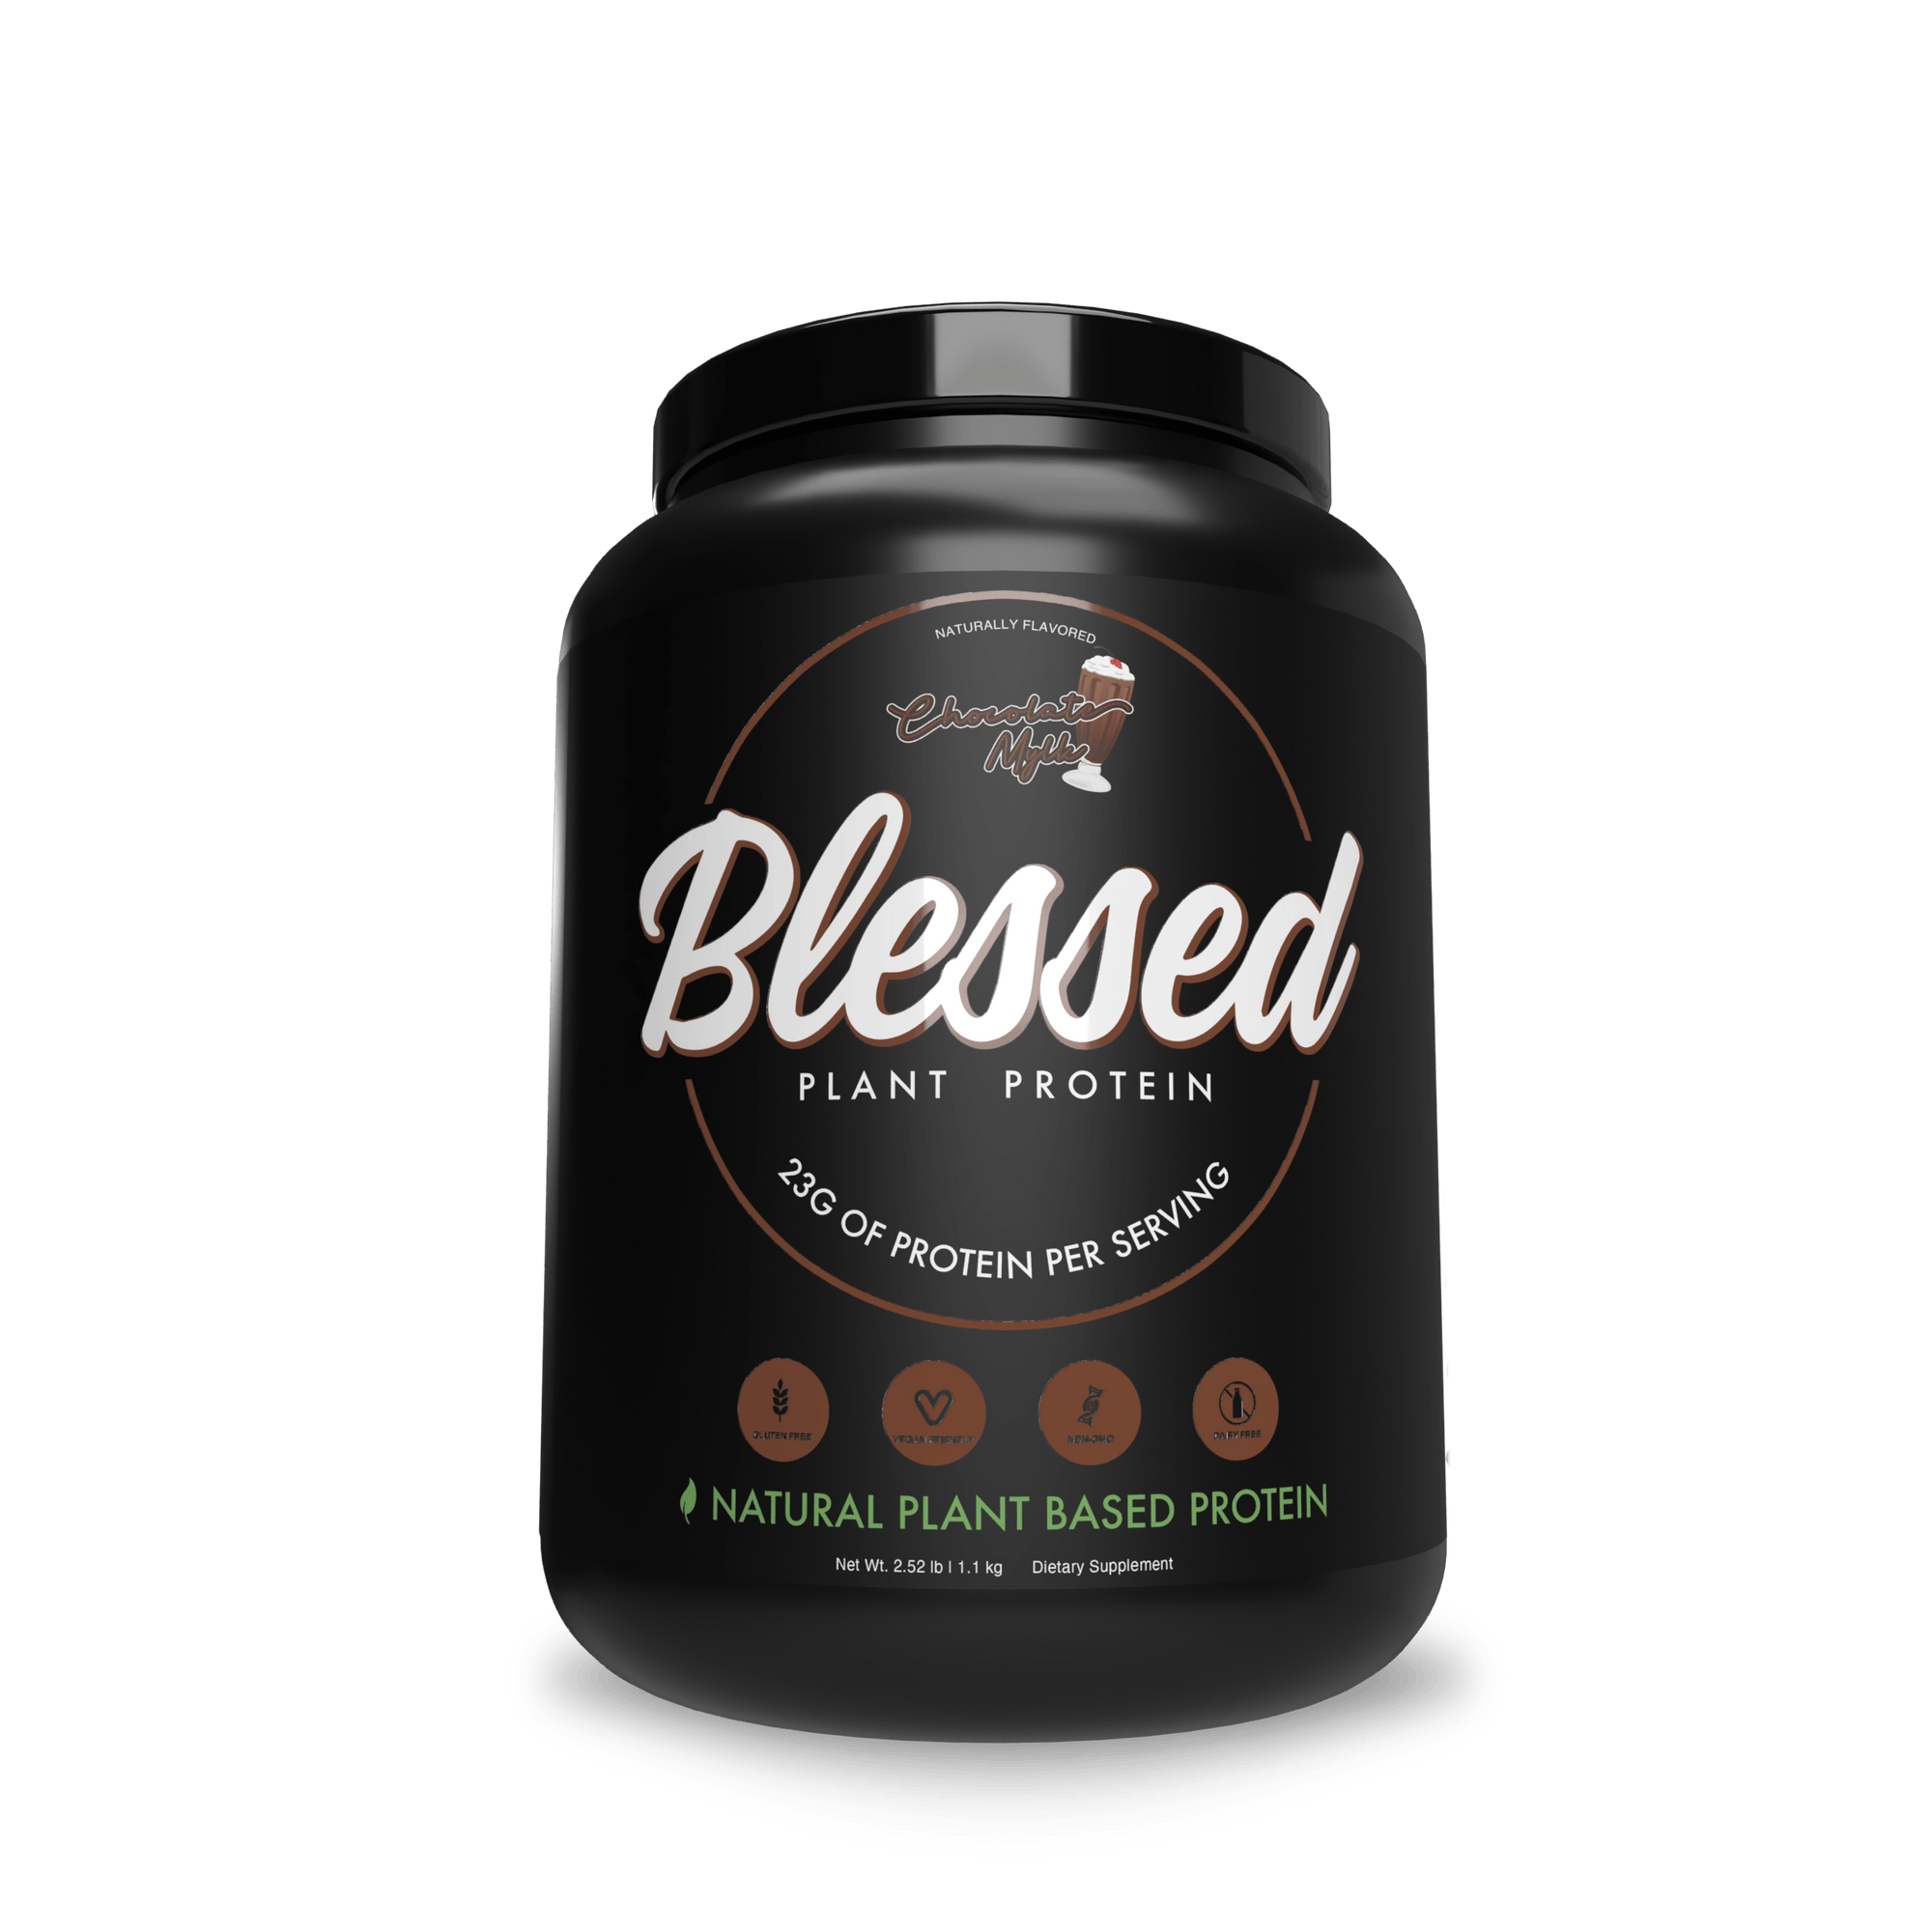 Fitness Hero presents EHP Labs Blessed Plant-Based Protein contains fast-absorbing raw activated pea protein isolate from pure golden yellow pea protein isolate, the highest quality pea protein source available. Additionally, this highly effective vegan protein may support your recovery with its highly inclusive amino acid profile while simultaneously supporting your weight goals with its low-carb formula. Nobody knows your body like you.